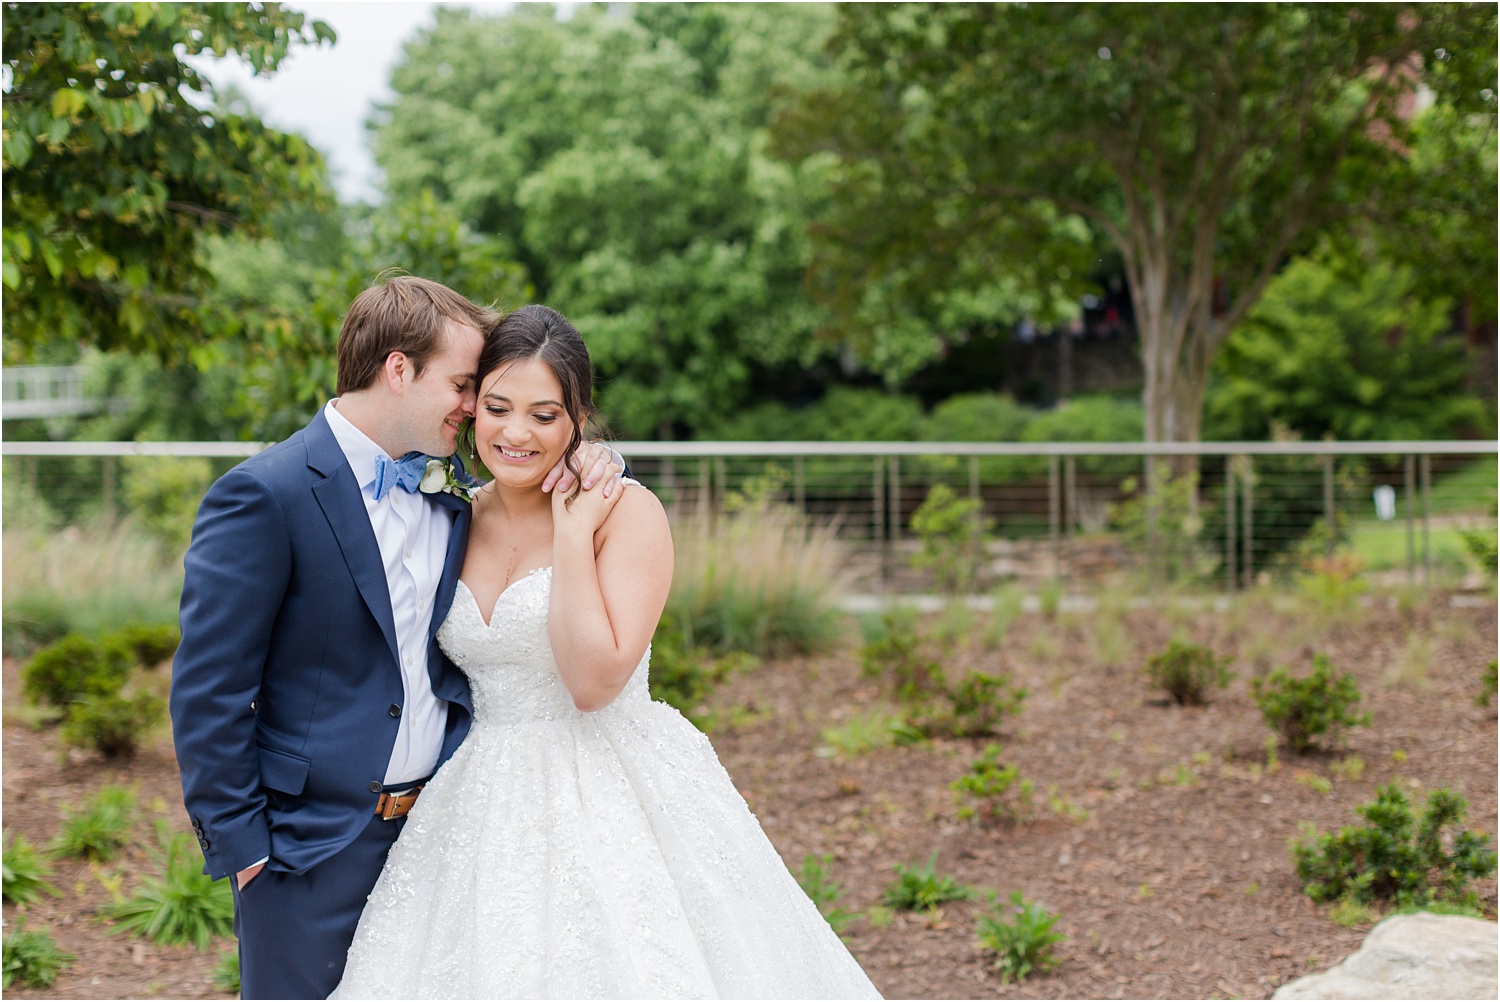 Indoor Wedding at The Huguenot Downtown Greenville